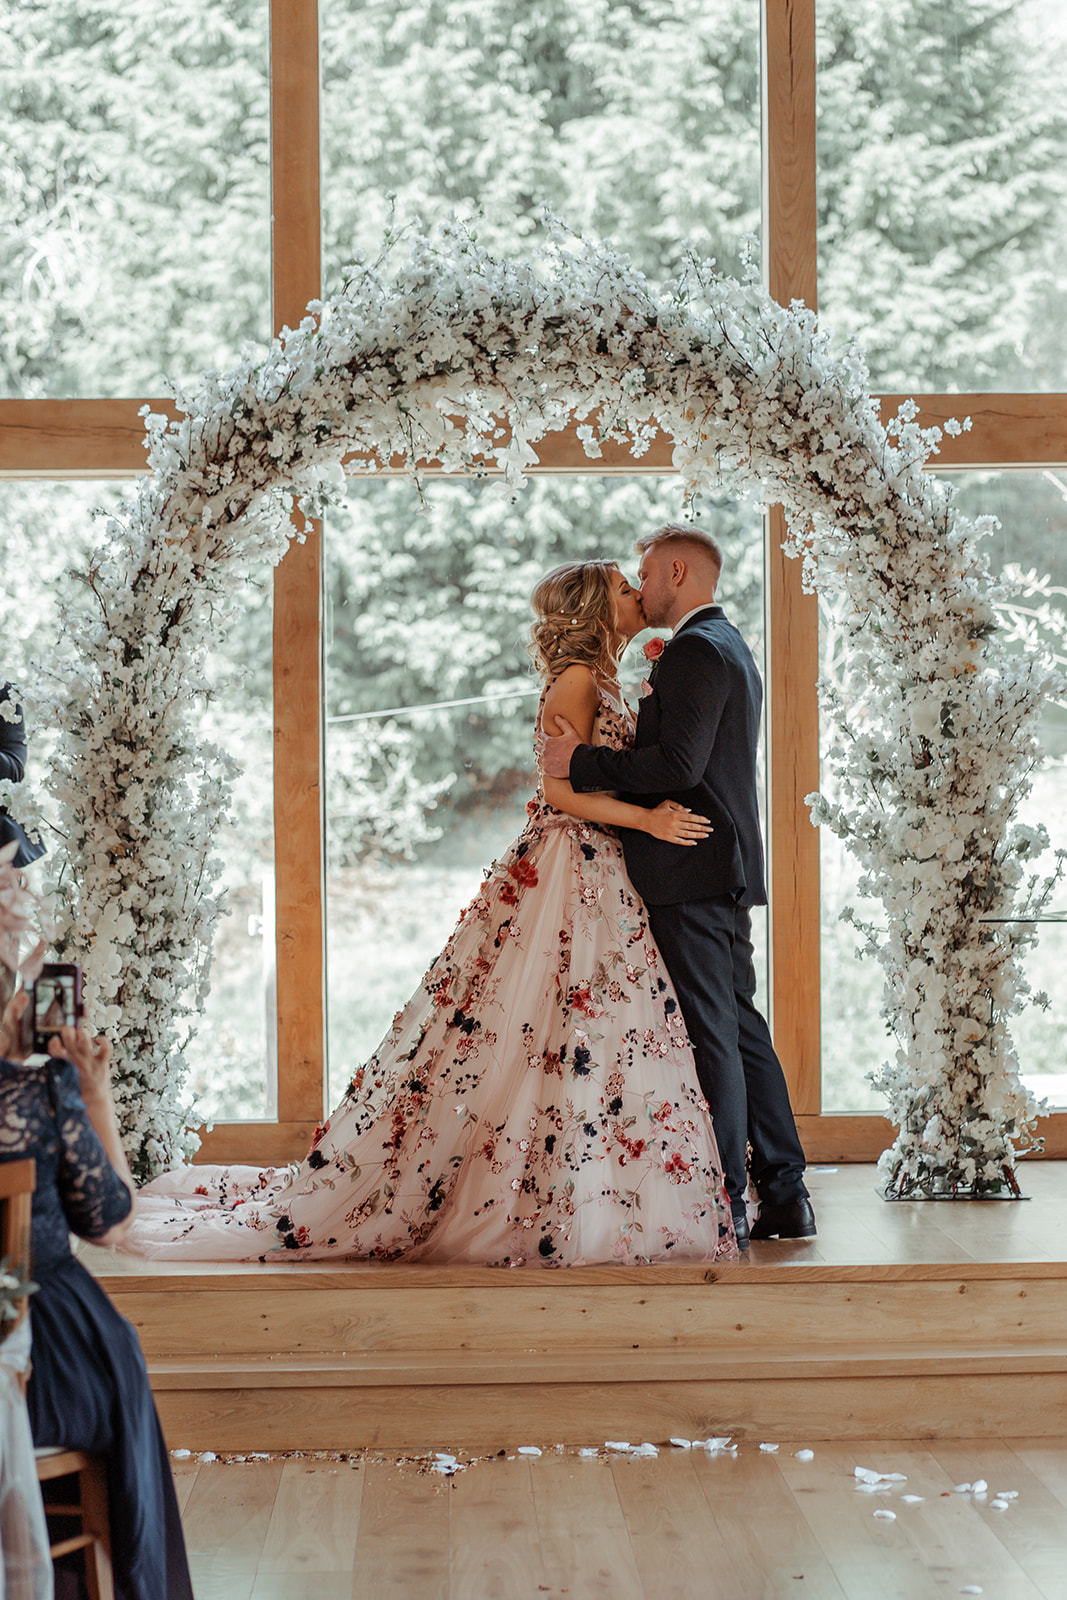 Ronald Joyce real bride, Rebecca, and her husband, Michael, kissing after saying their vows. Rebecca has curled blonde hair and wears our blush Celestina ballgown wedding dress with claret, navy and green floral appliques.